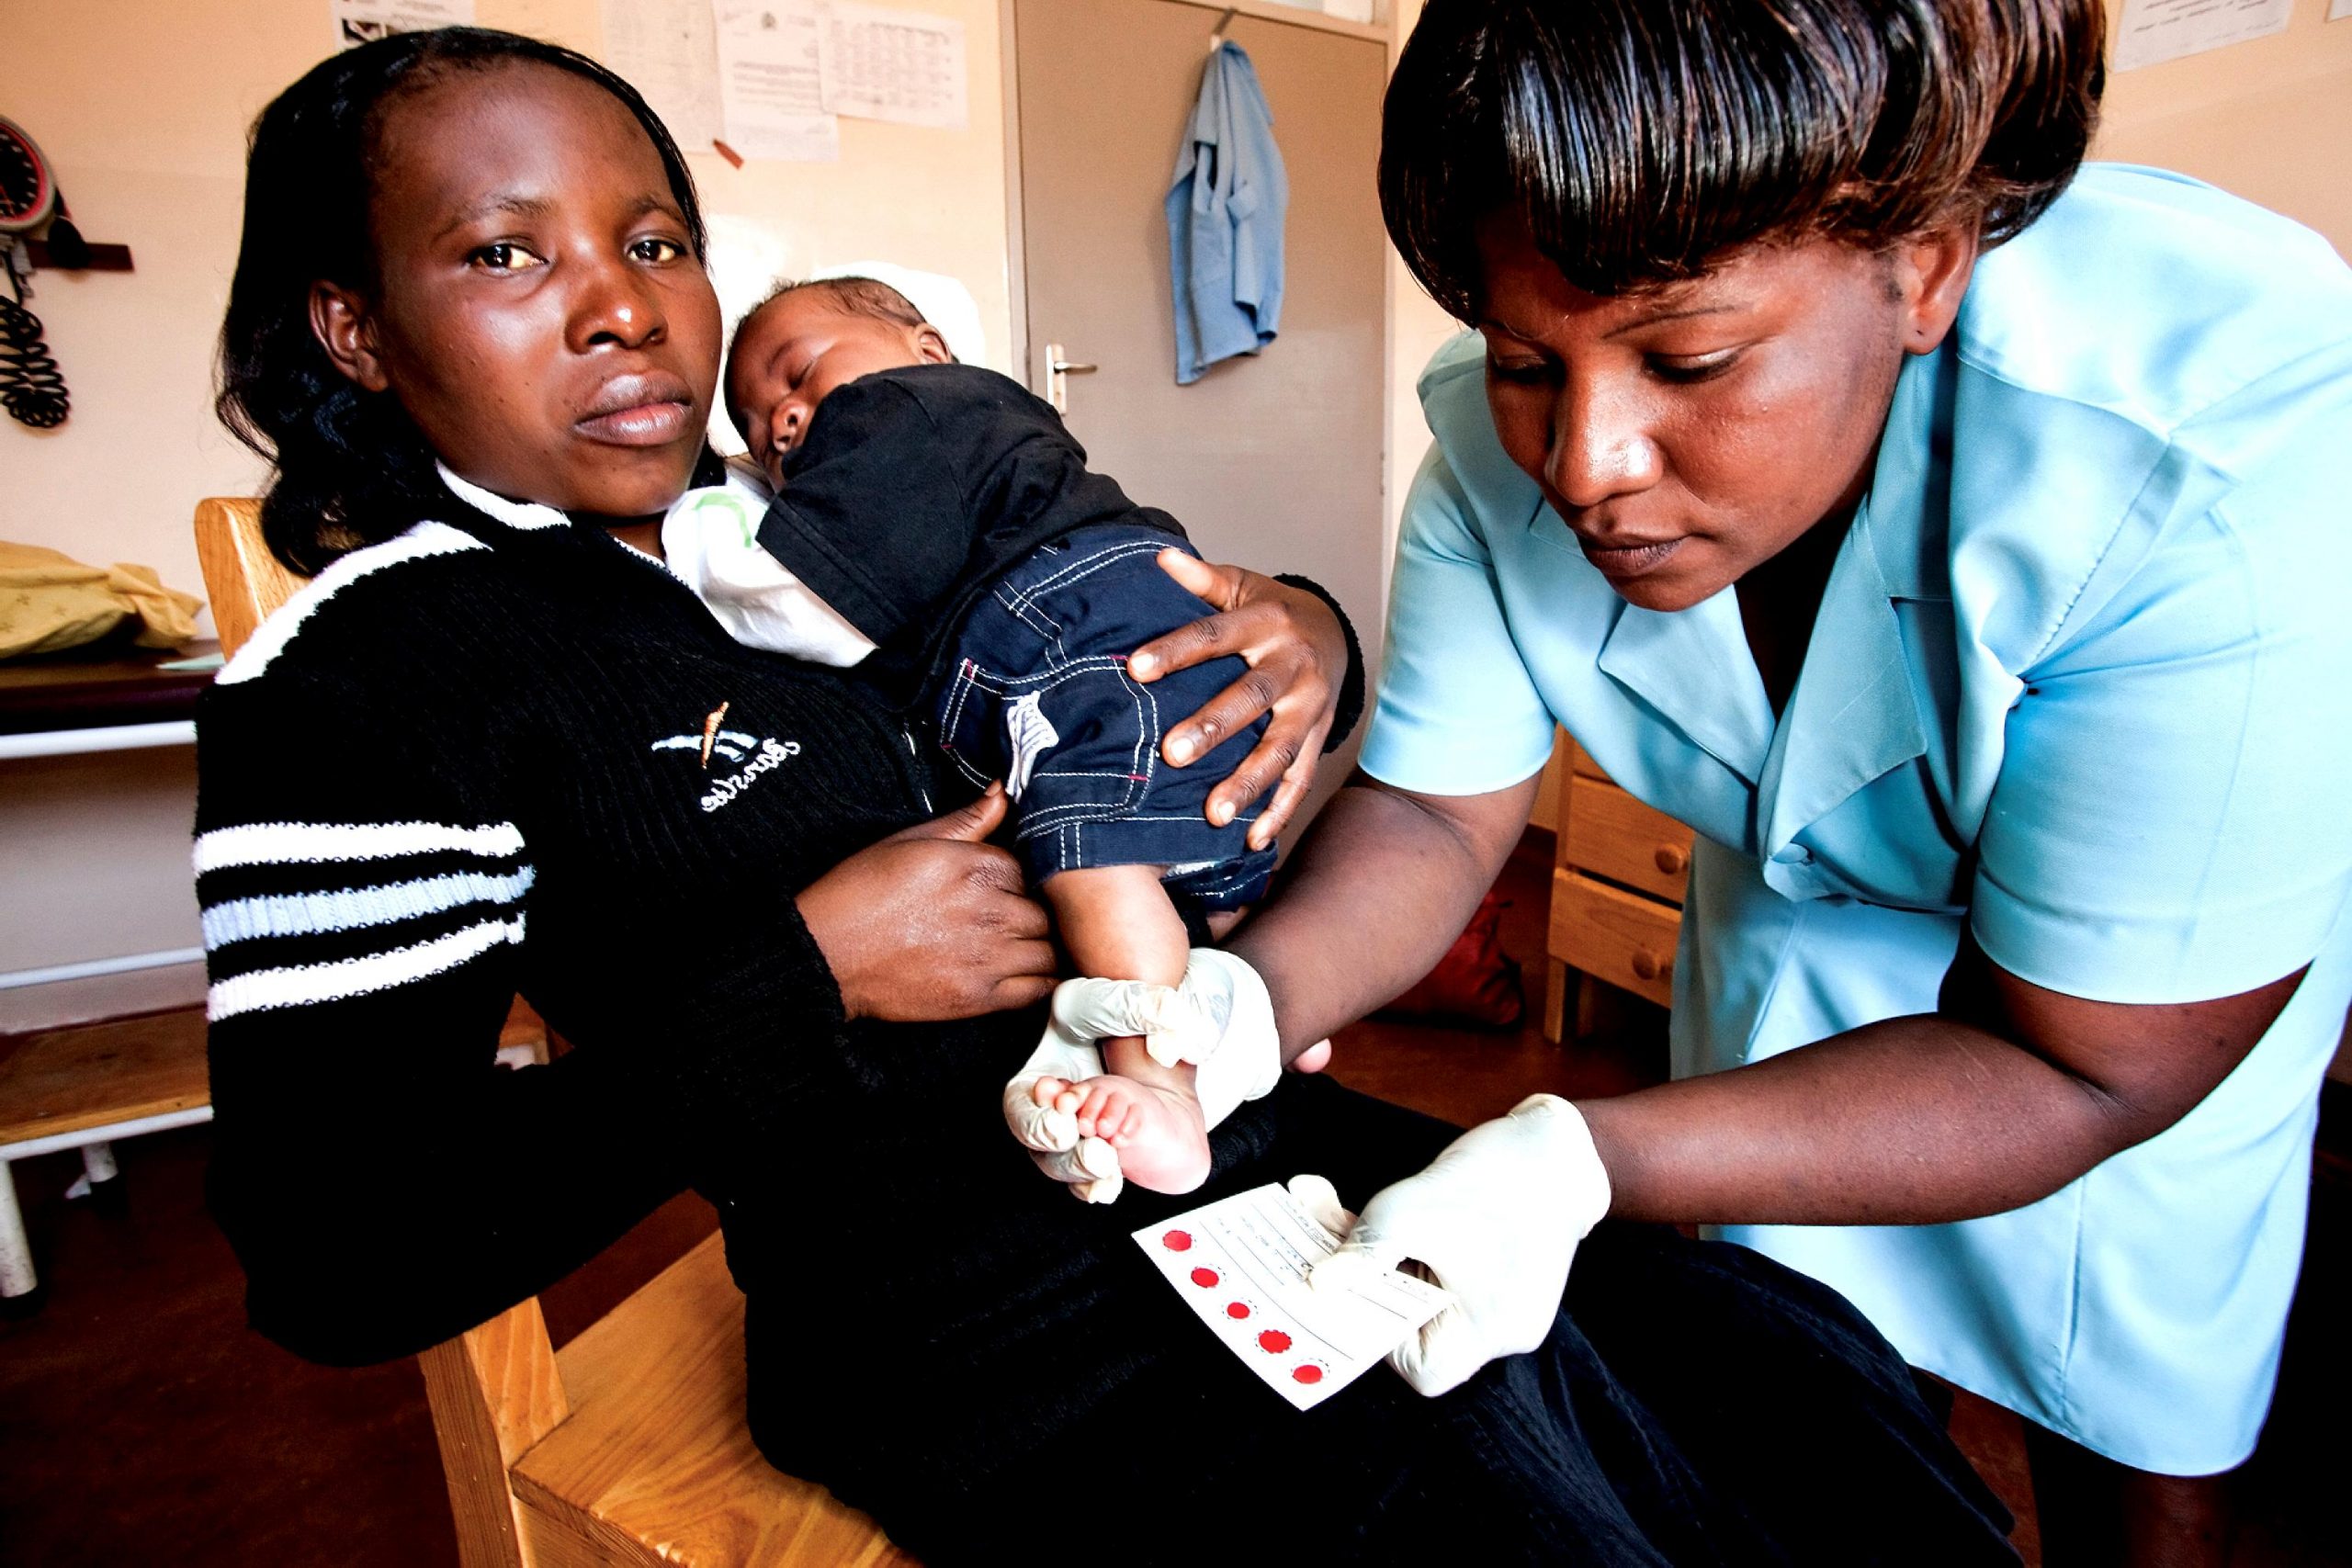 Photo showing a seated mother holding an infant while a nurse performs health screenings on the infant